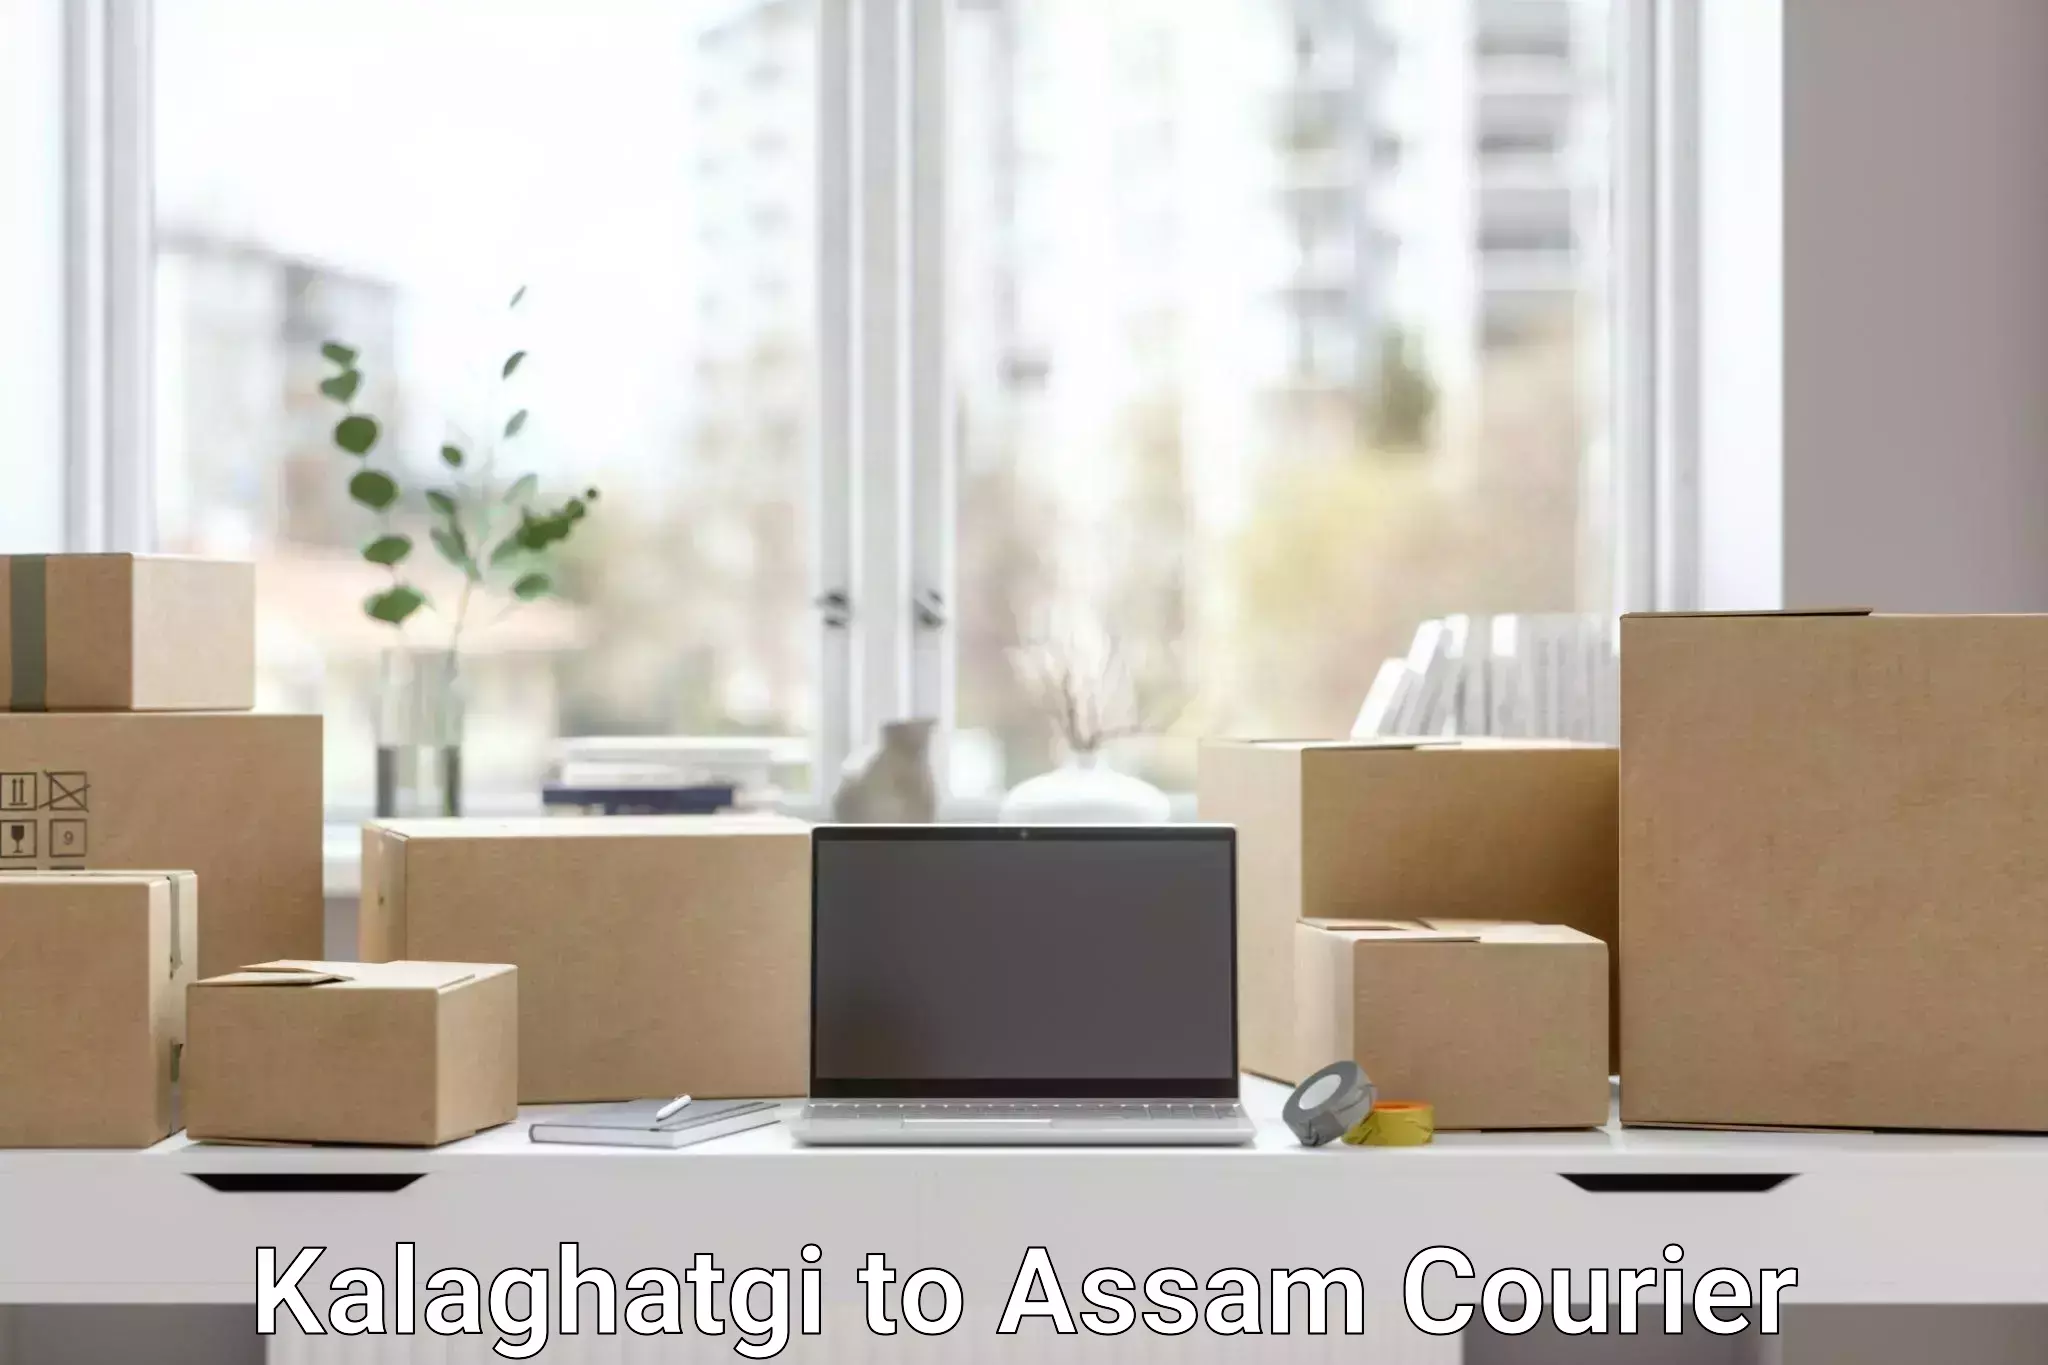 Package tracking in Kalaghatgi to Assam